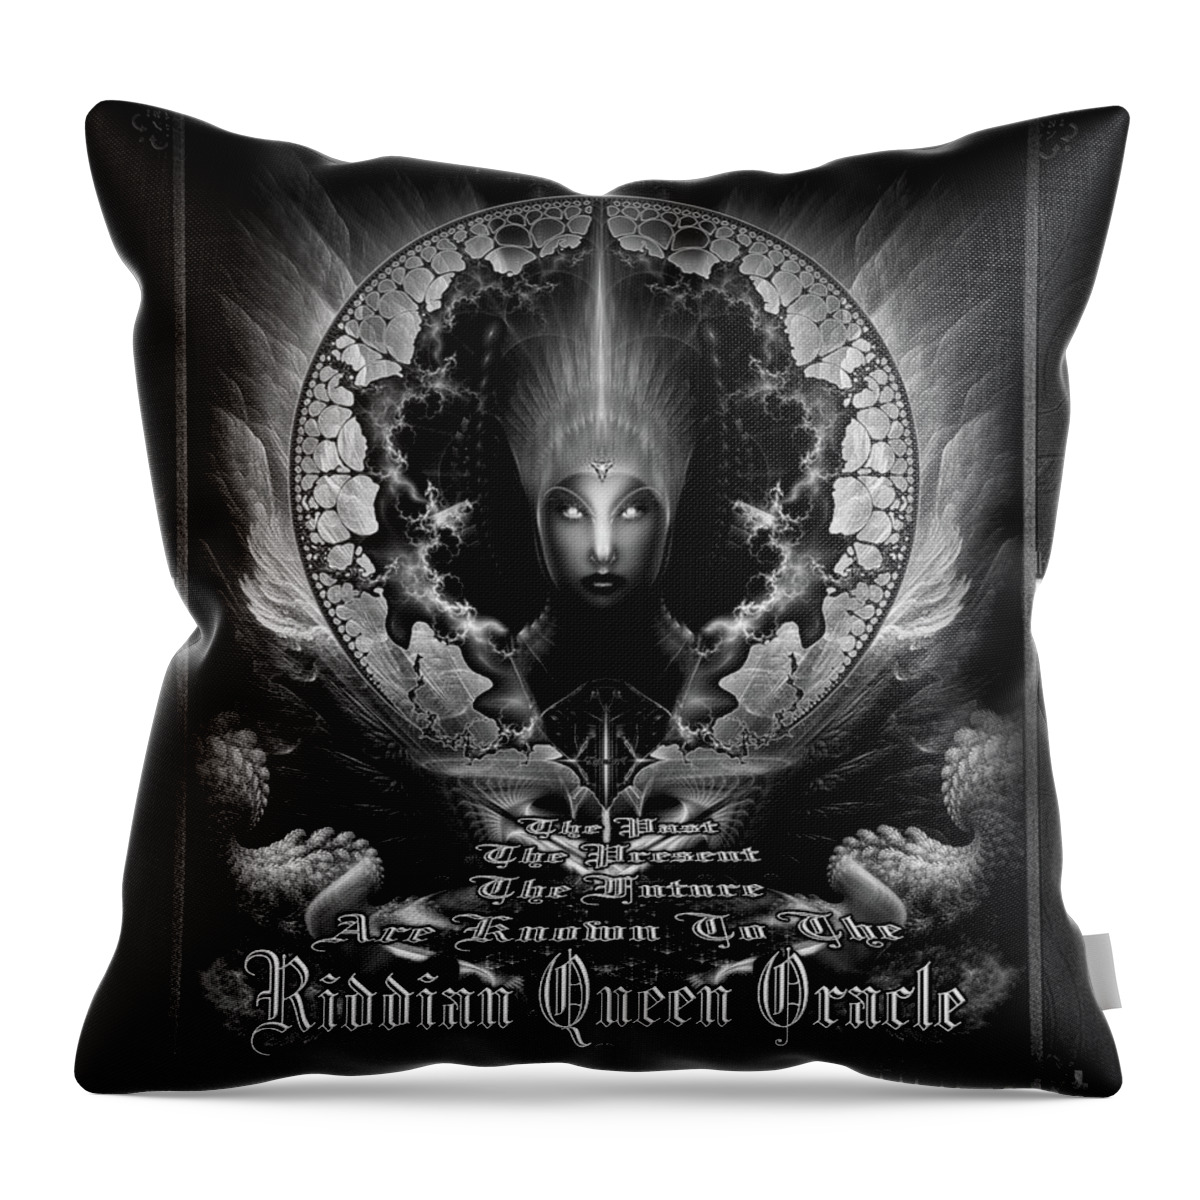 Riddian Queen Throw Pillow featuring the painting Riddian Queen Oracle GS Fractal Art by Xzendor7 by Rolando Burbon